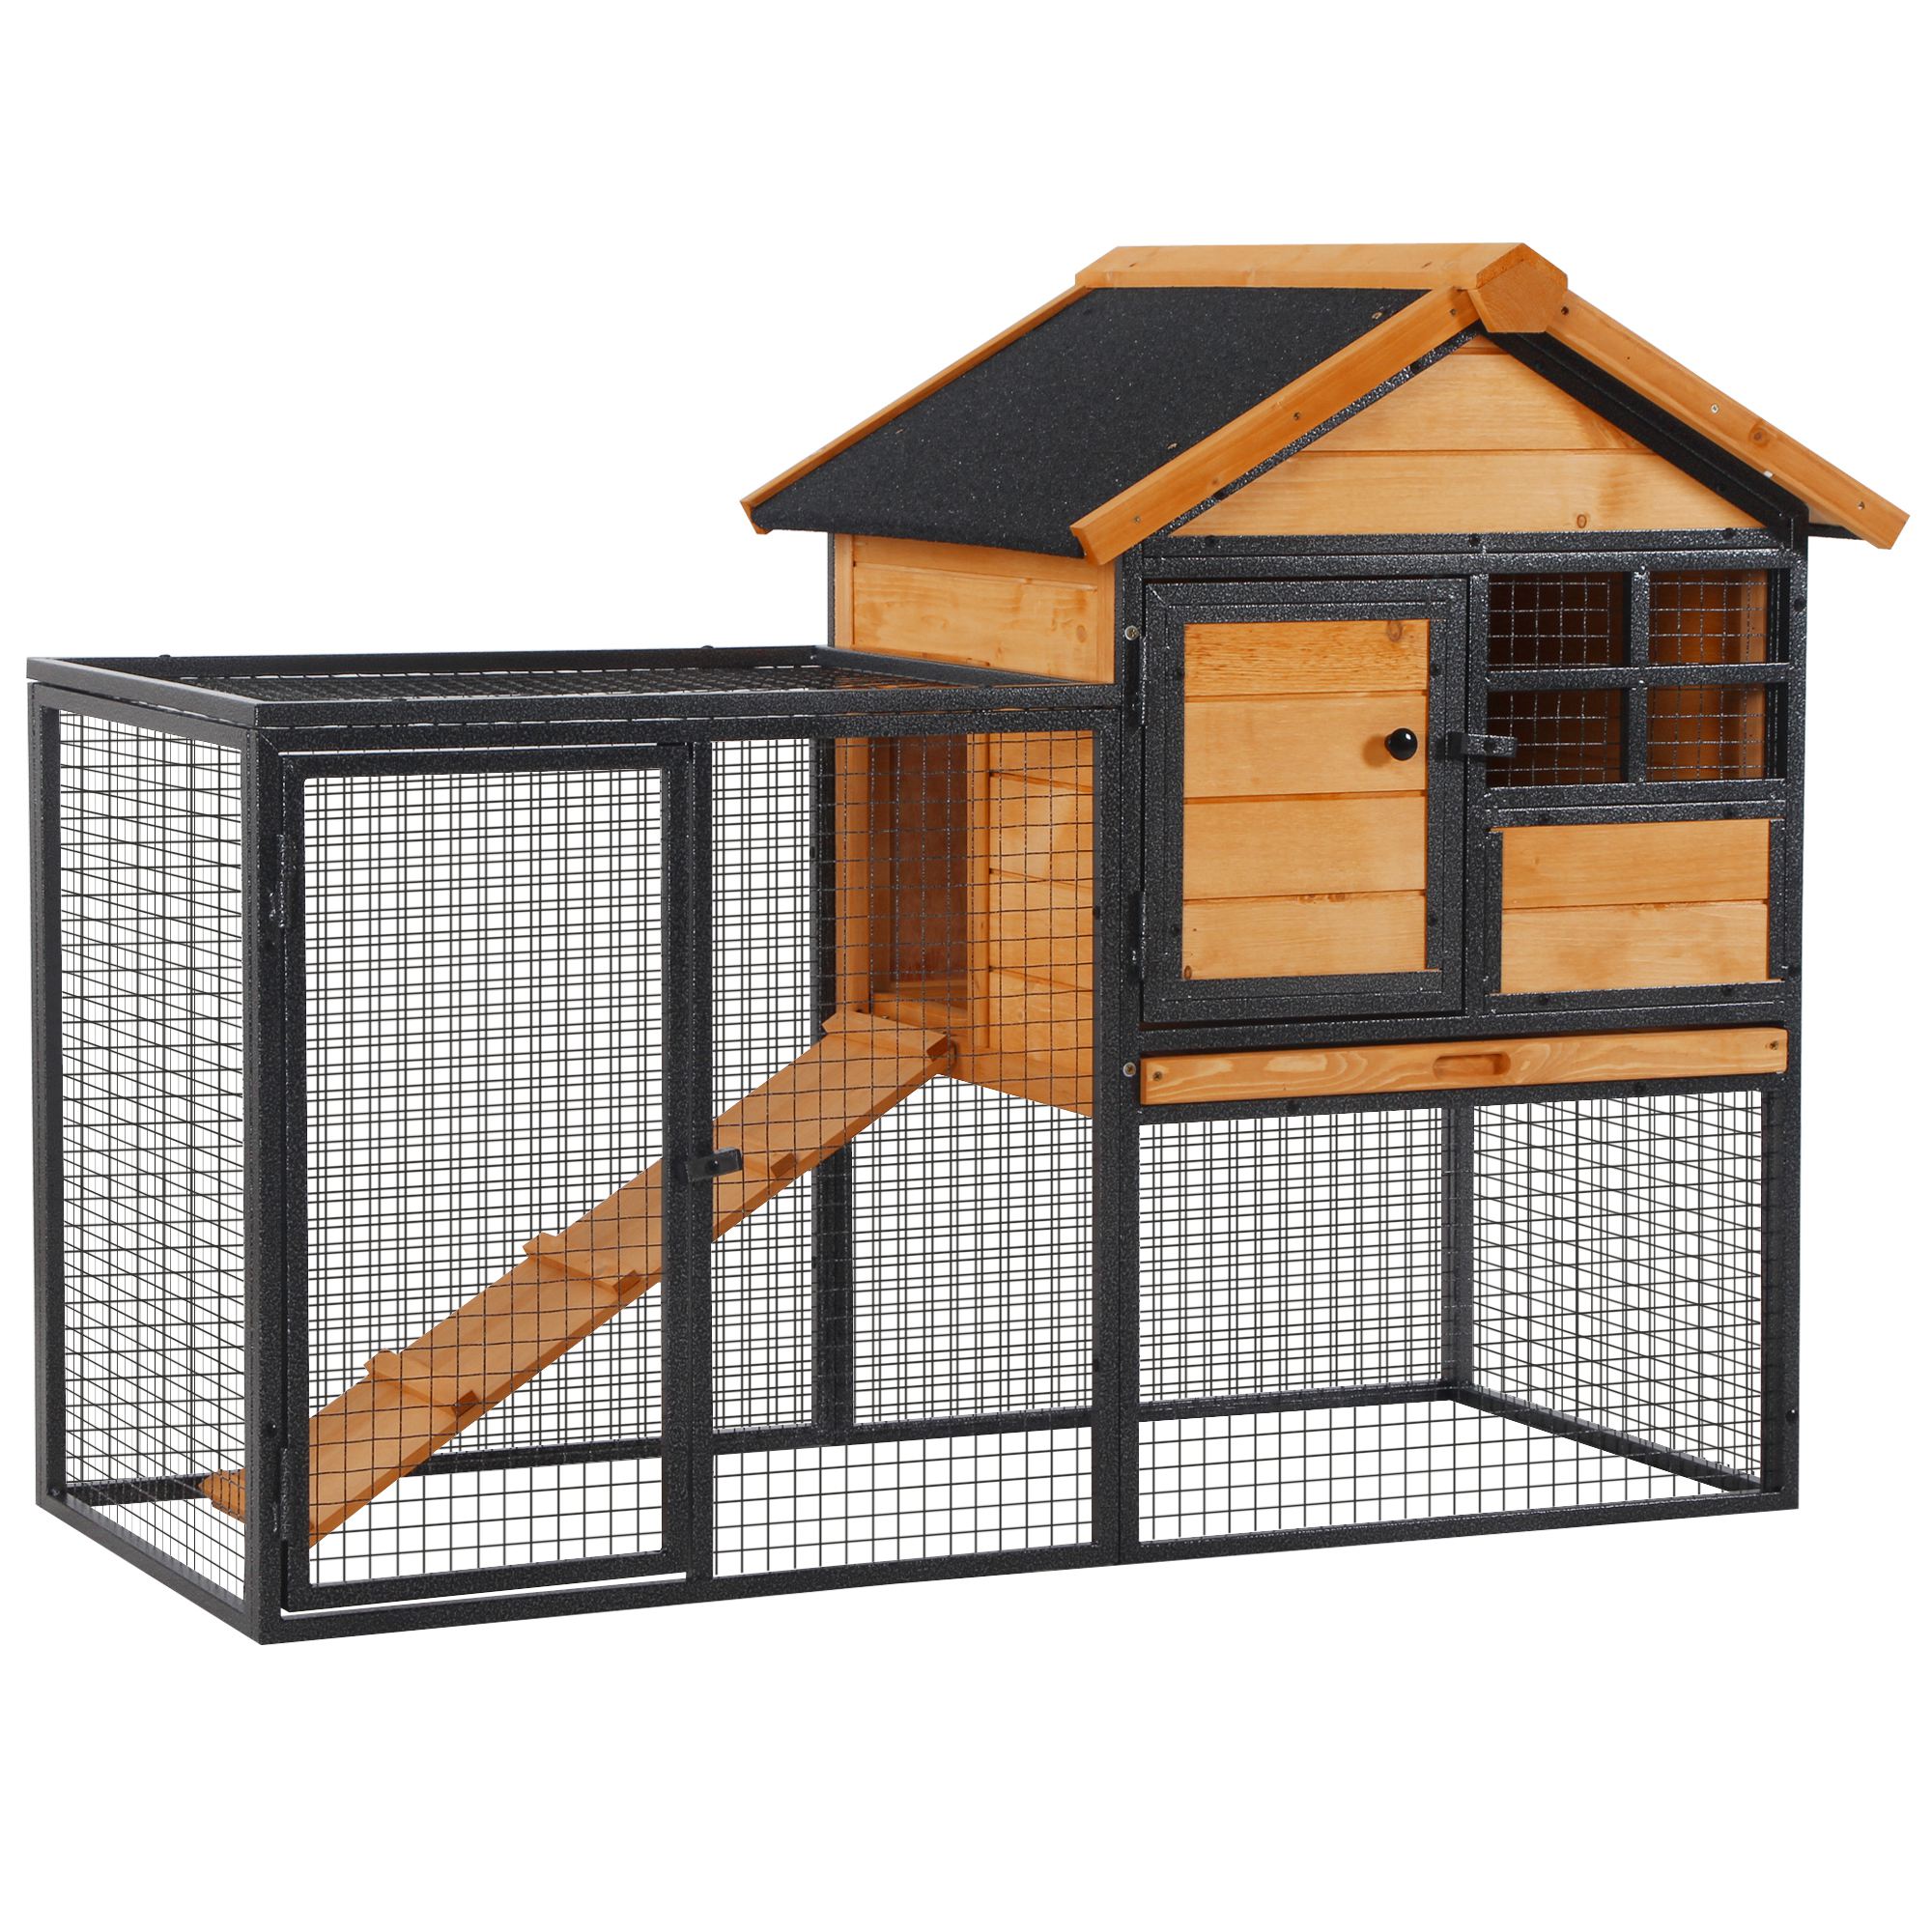 Wood-metal Pet House Elevated Rabbit Hutch Bunny Cage